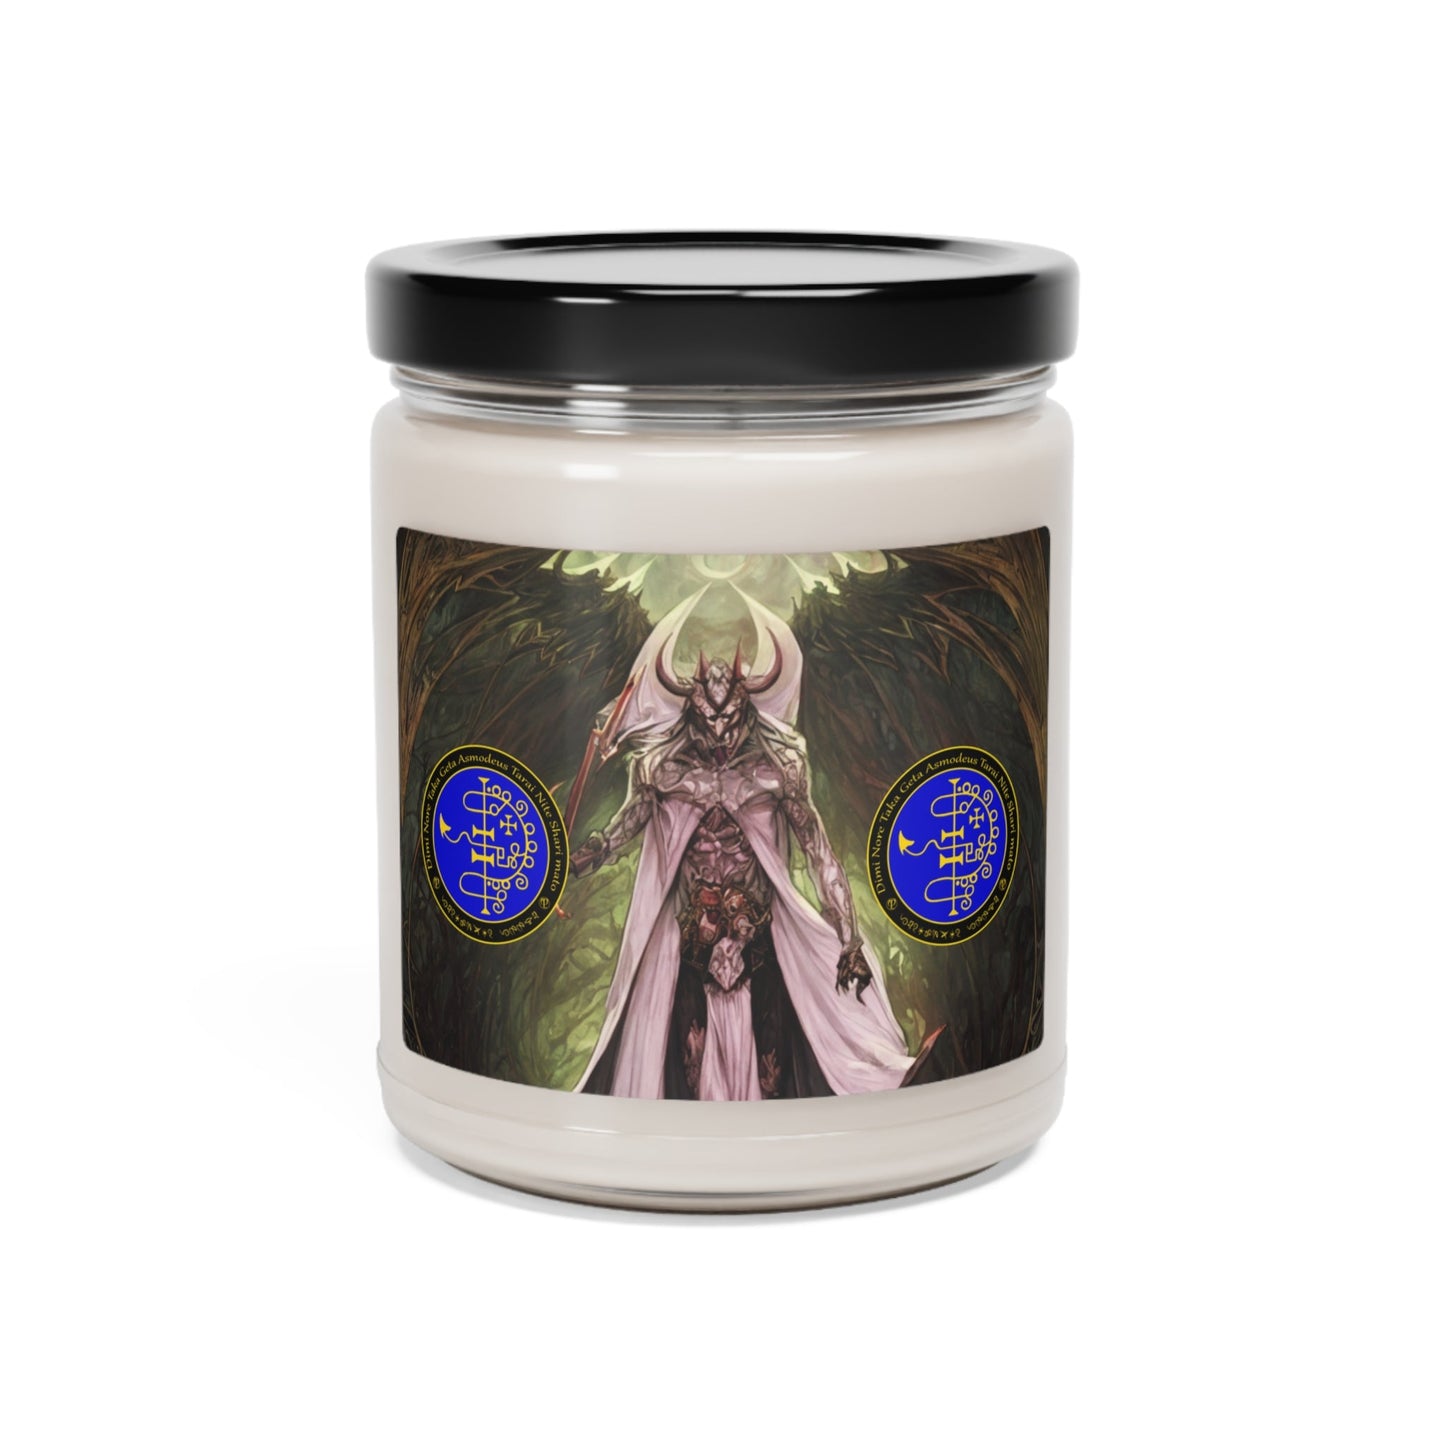 Demon-Asmodeus-oltar-Soy-Scented-Soy Candle-for-Gamble-related-offerings-rituals-inicijations-or-praying-and-meditation-21